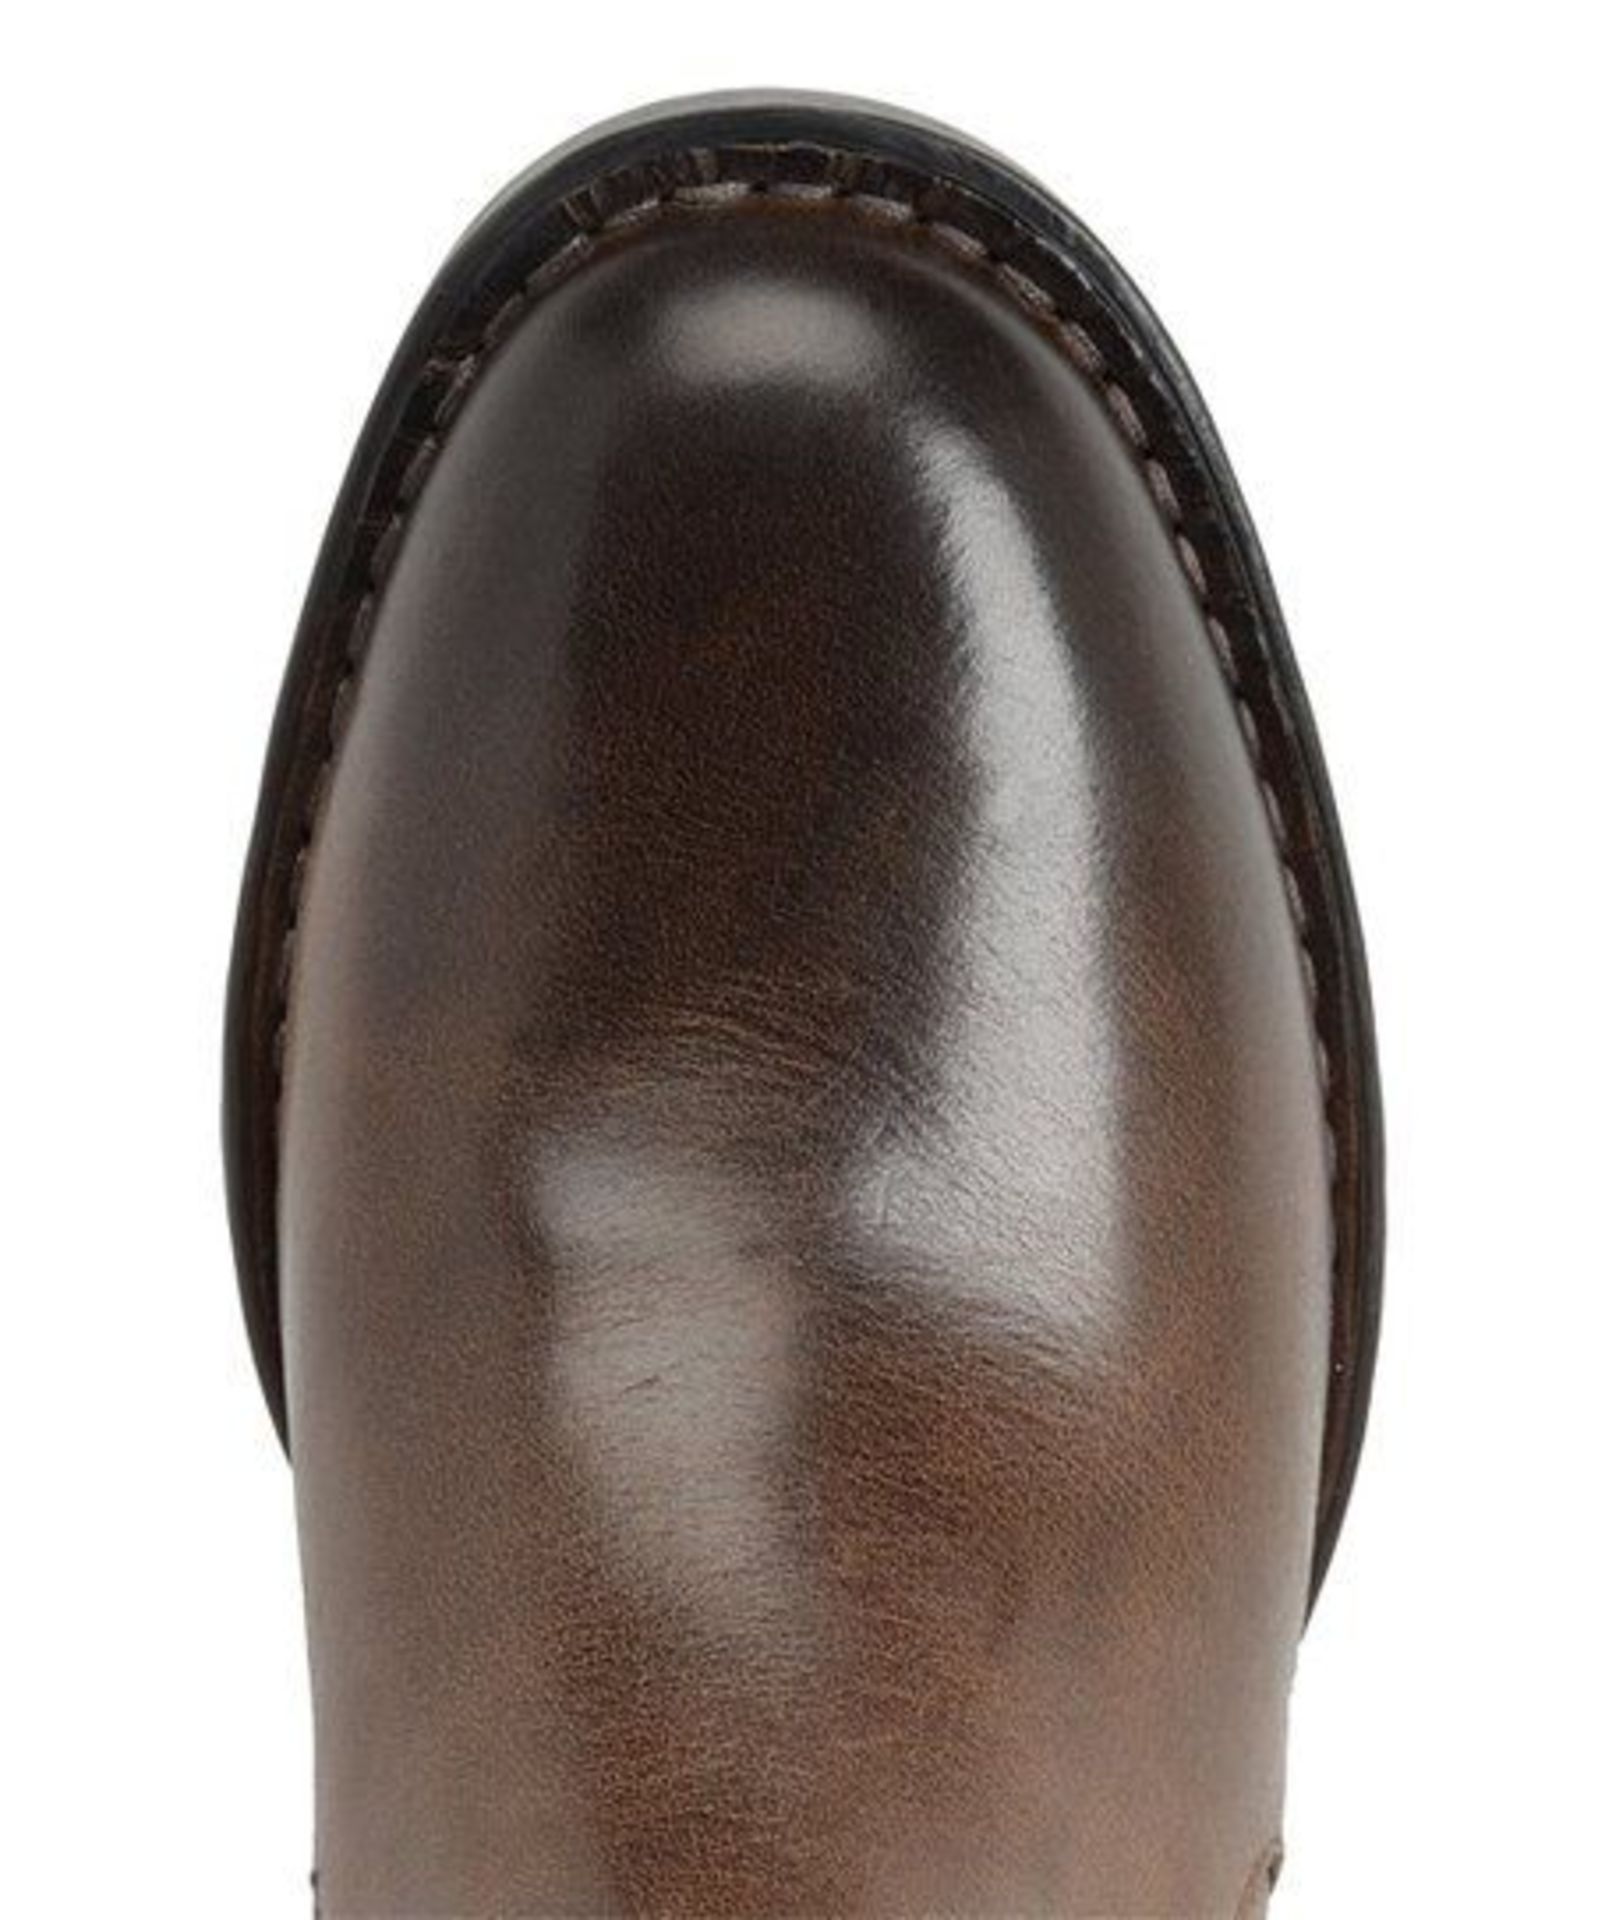 Børn Brown Timms Leather Bootie (Uk Size:7.5/Us Size:10) (New With Box) [Ref: 55334204-K-004] - Image 4 of 5